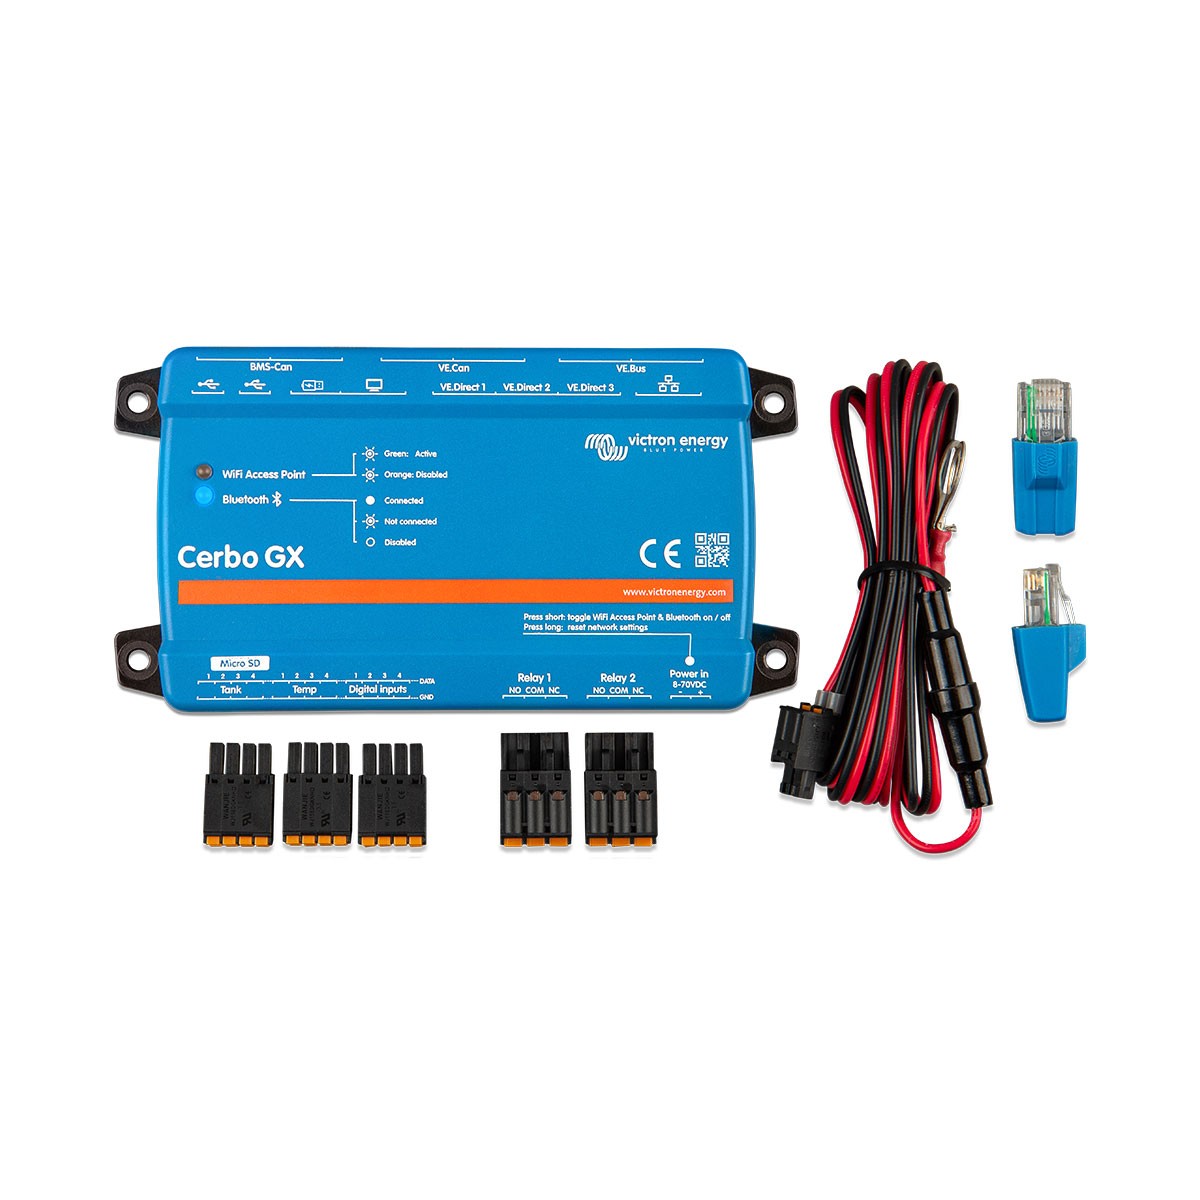 Cerbo Gx Victron Energy monitoring module